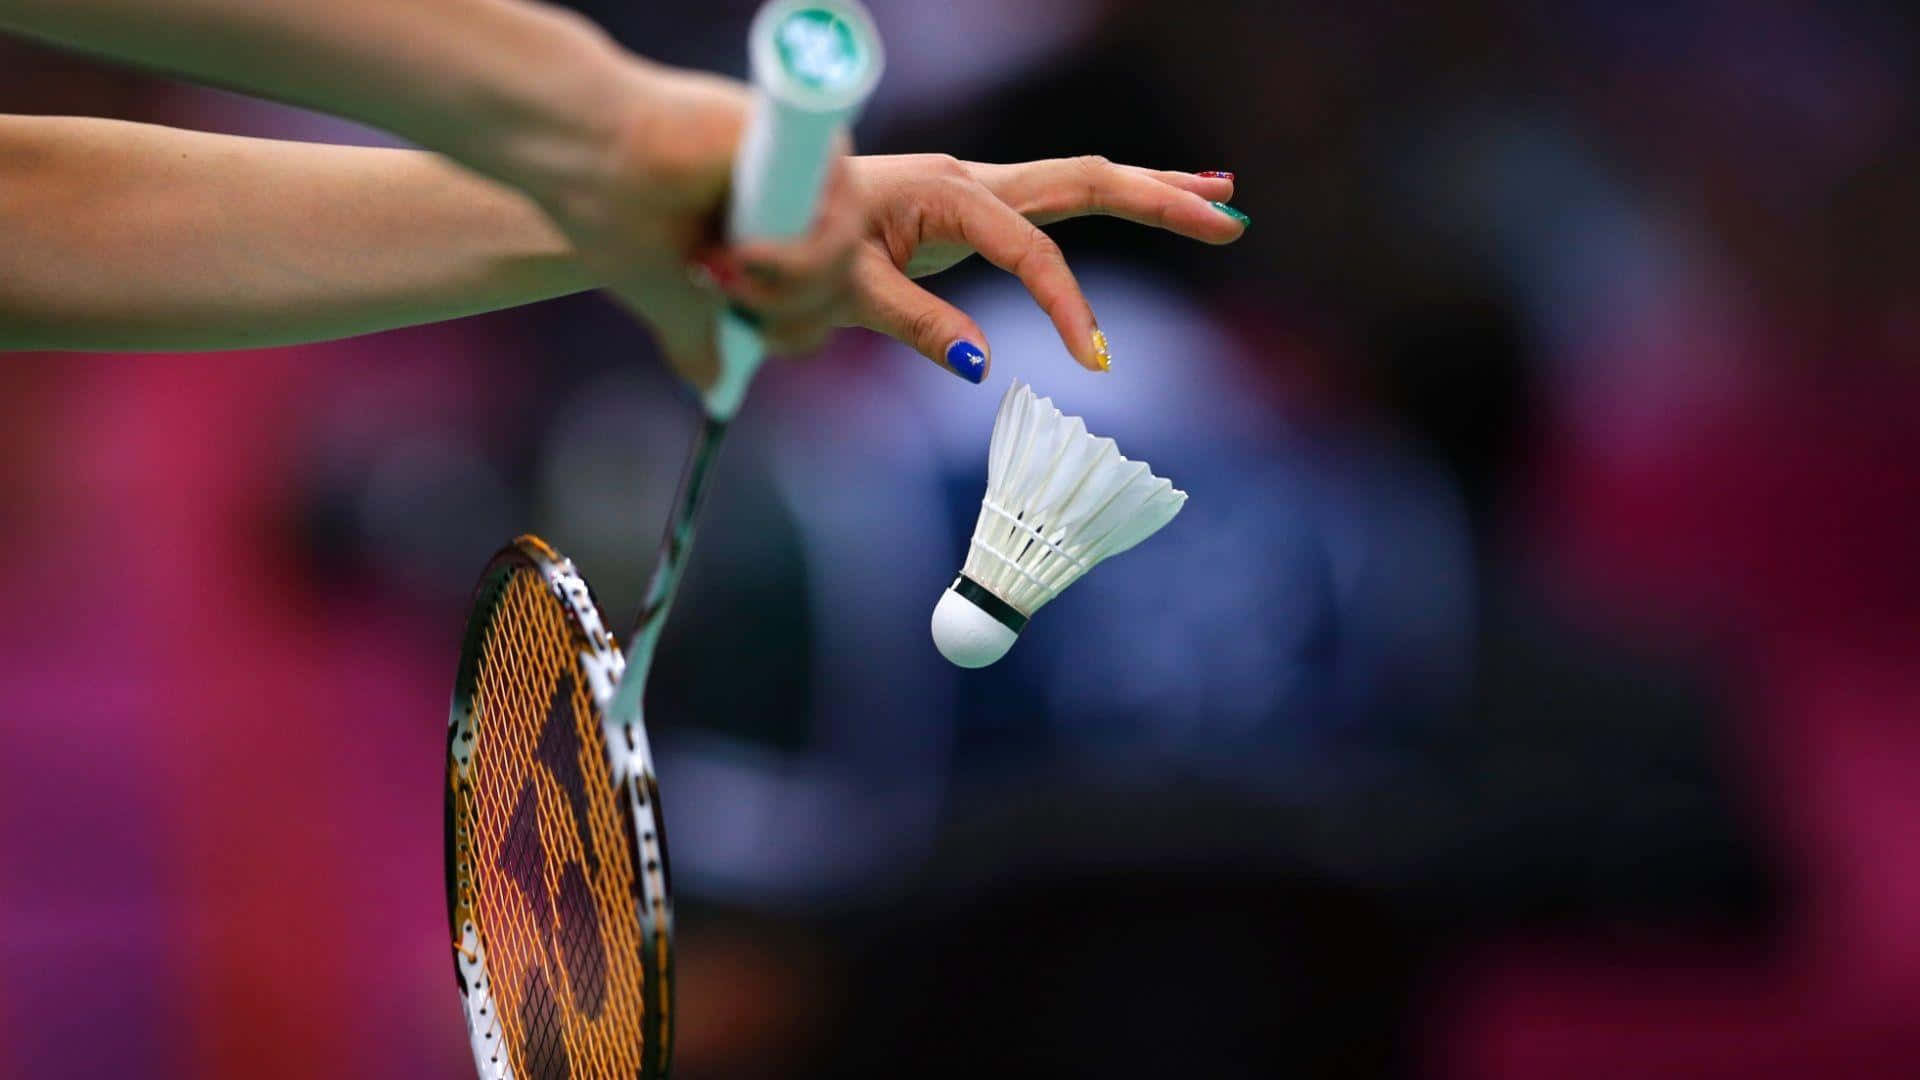 A Moment of Focus for a Badminton Player